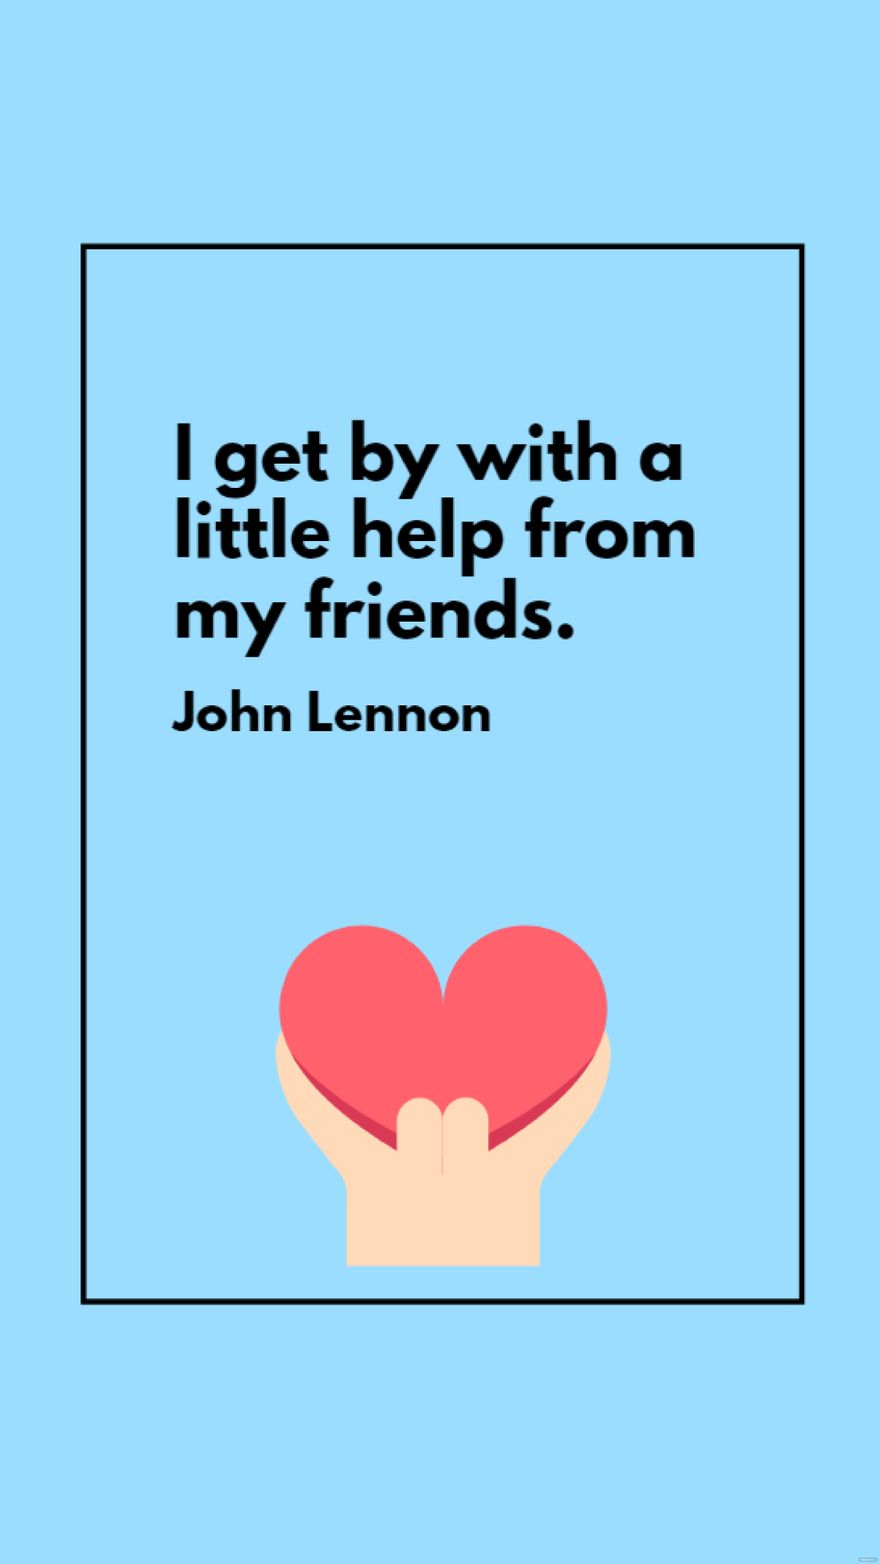 John Lennon - I get by with a little help from my friends.